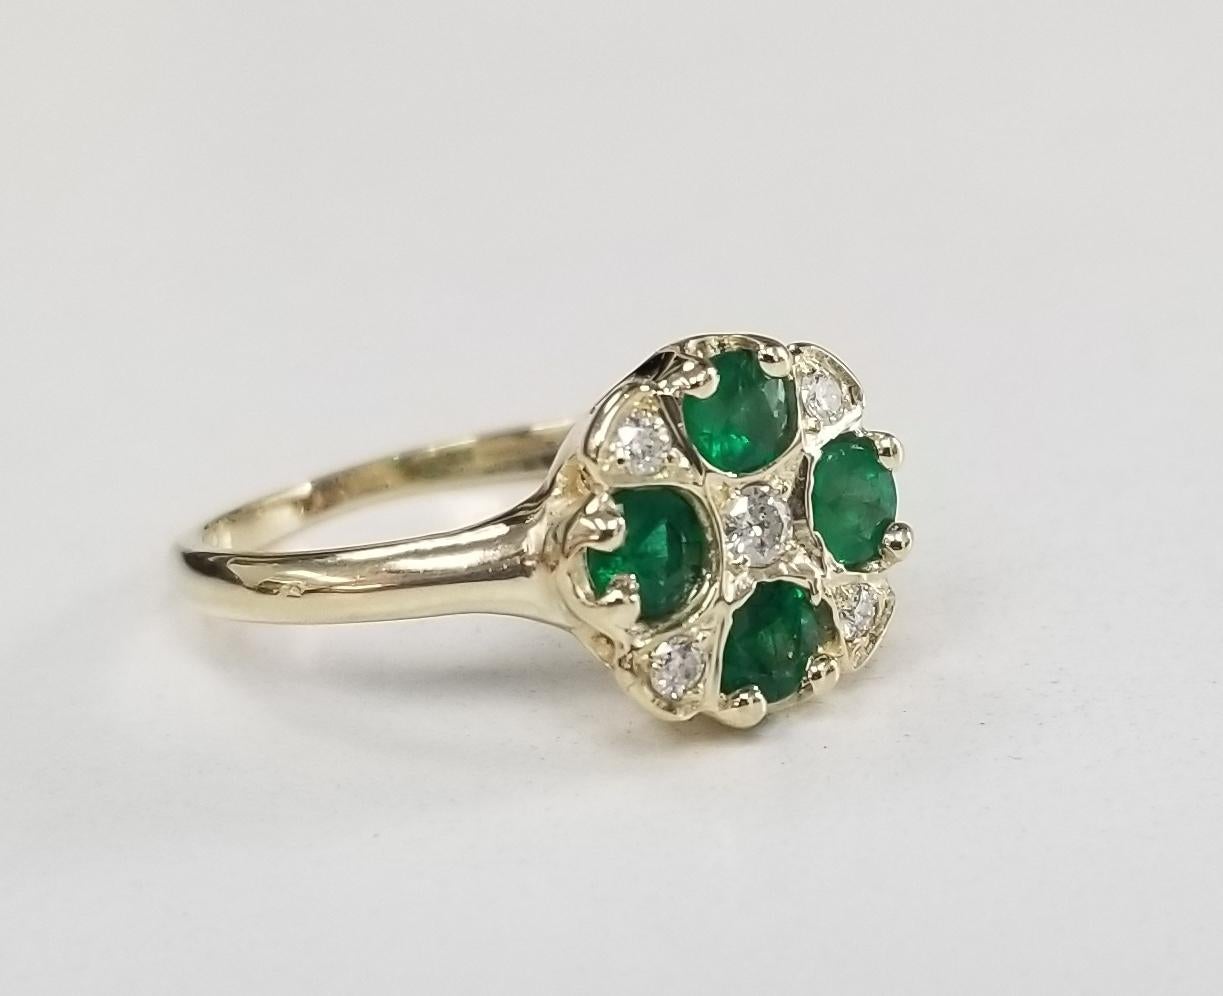 14k yellow gold emerald and diamond ring, containing 4 round cut emeralds of fine quality weighing .70pts. and 5 round full cut diamonds of very fine quality weighing .13pts. in an 